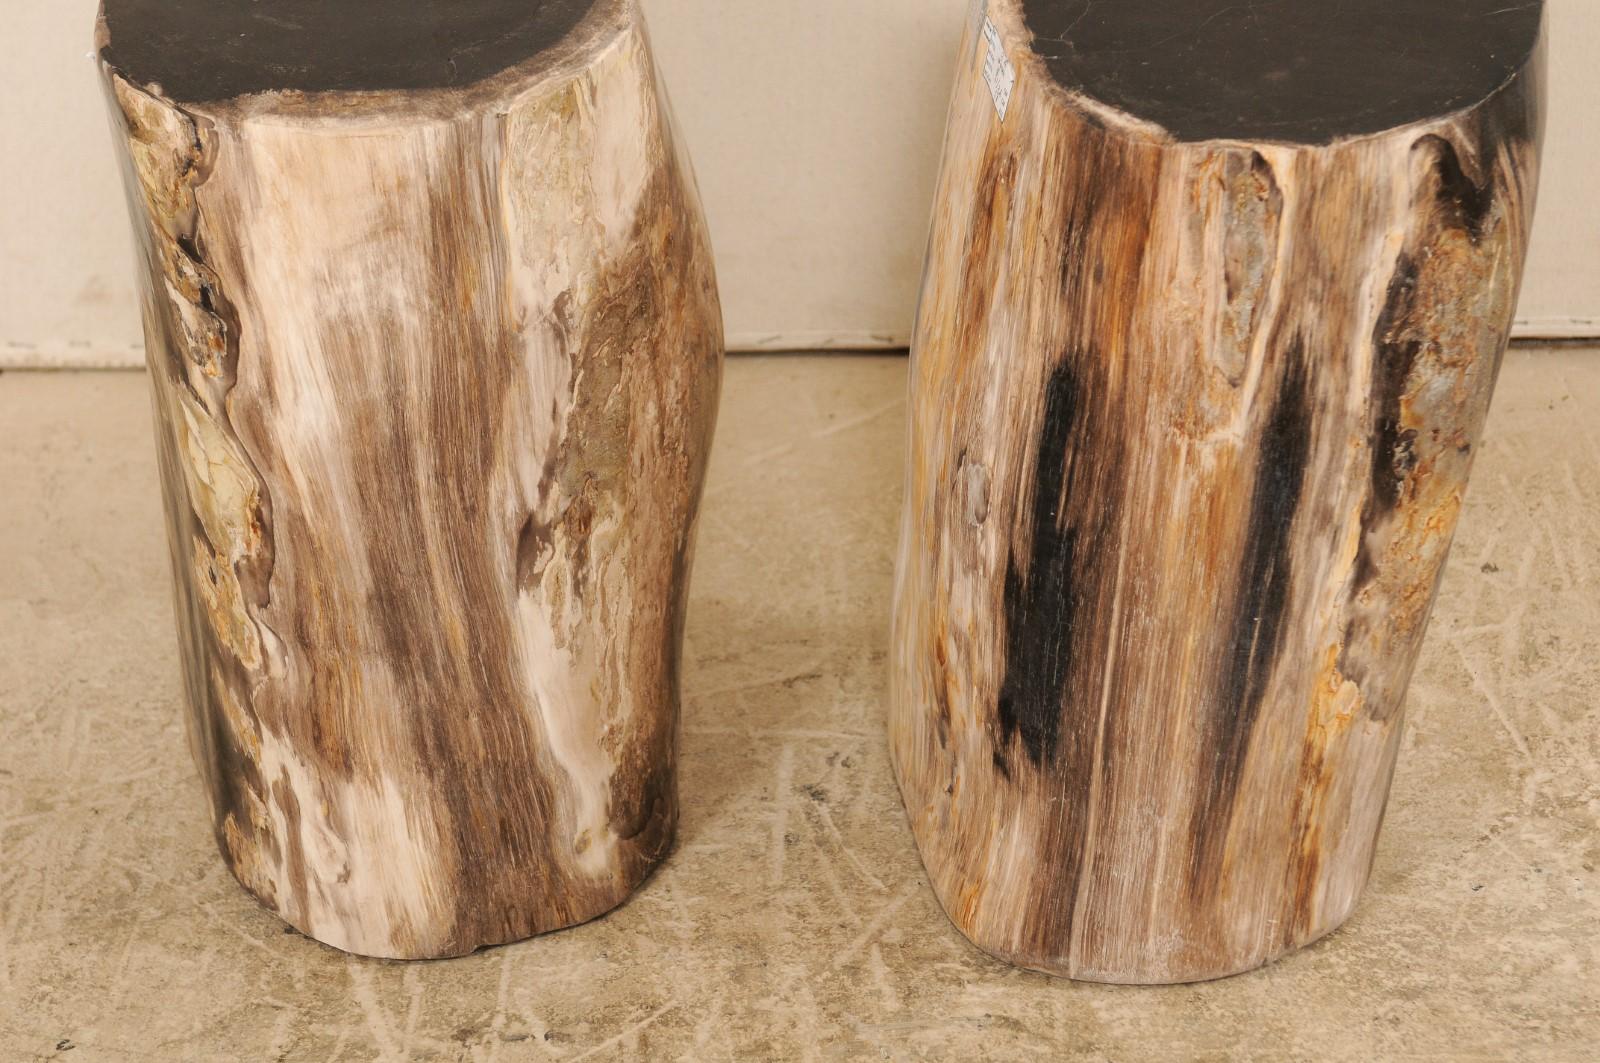 Contemporary Pair of Polished Petrified Wood Side Tables or Stools in Cream and Black